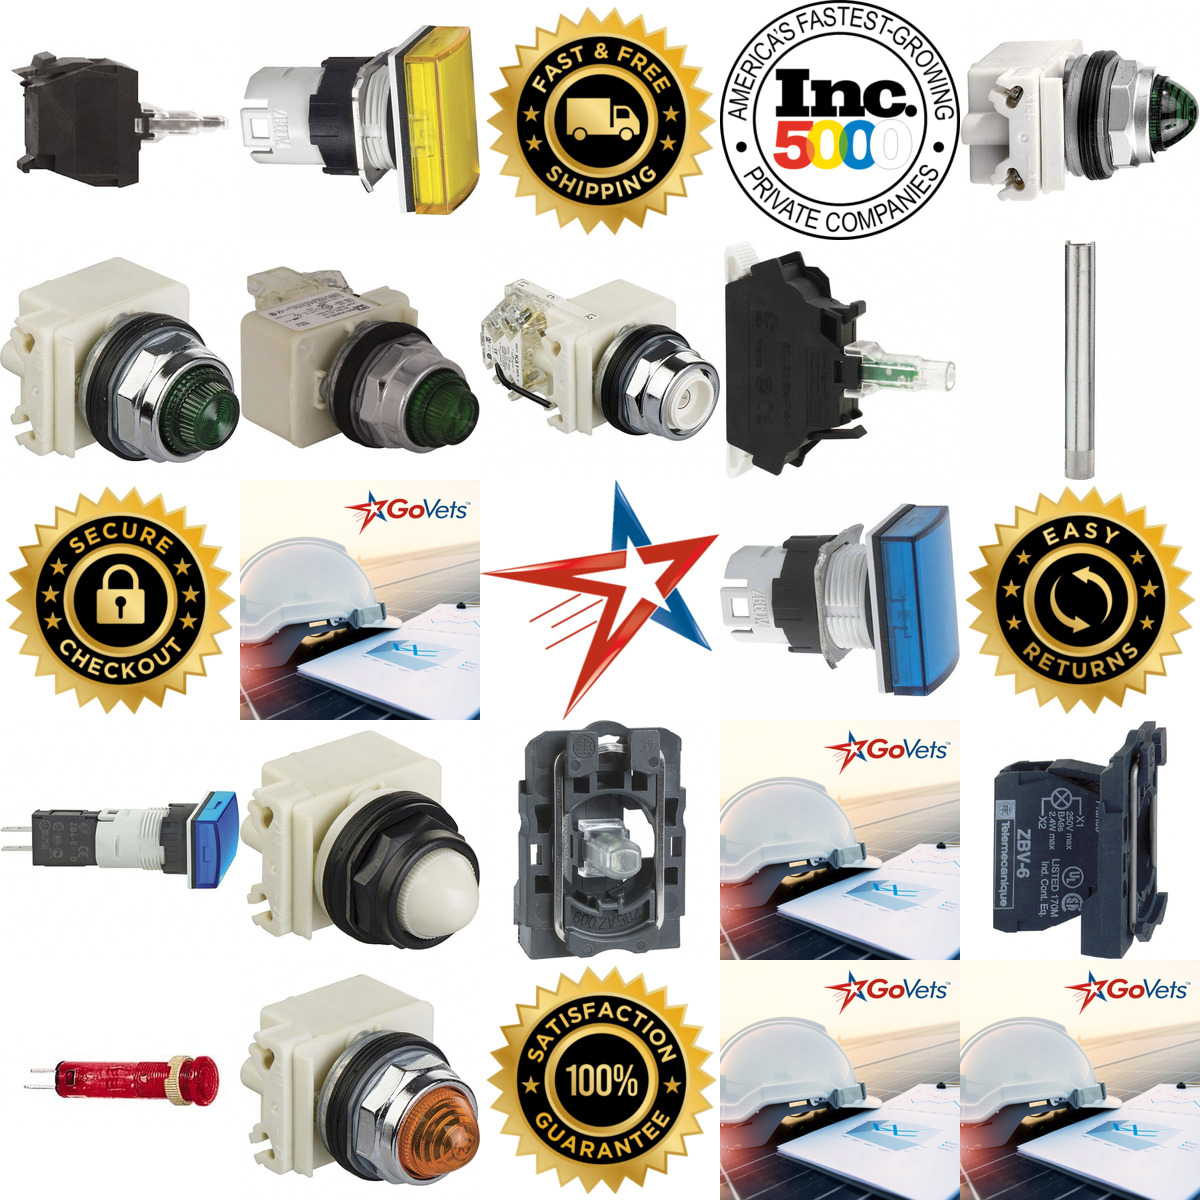 A selection of Pilot and Indicator Lights products on GoVets